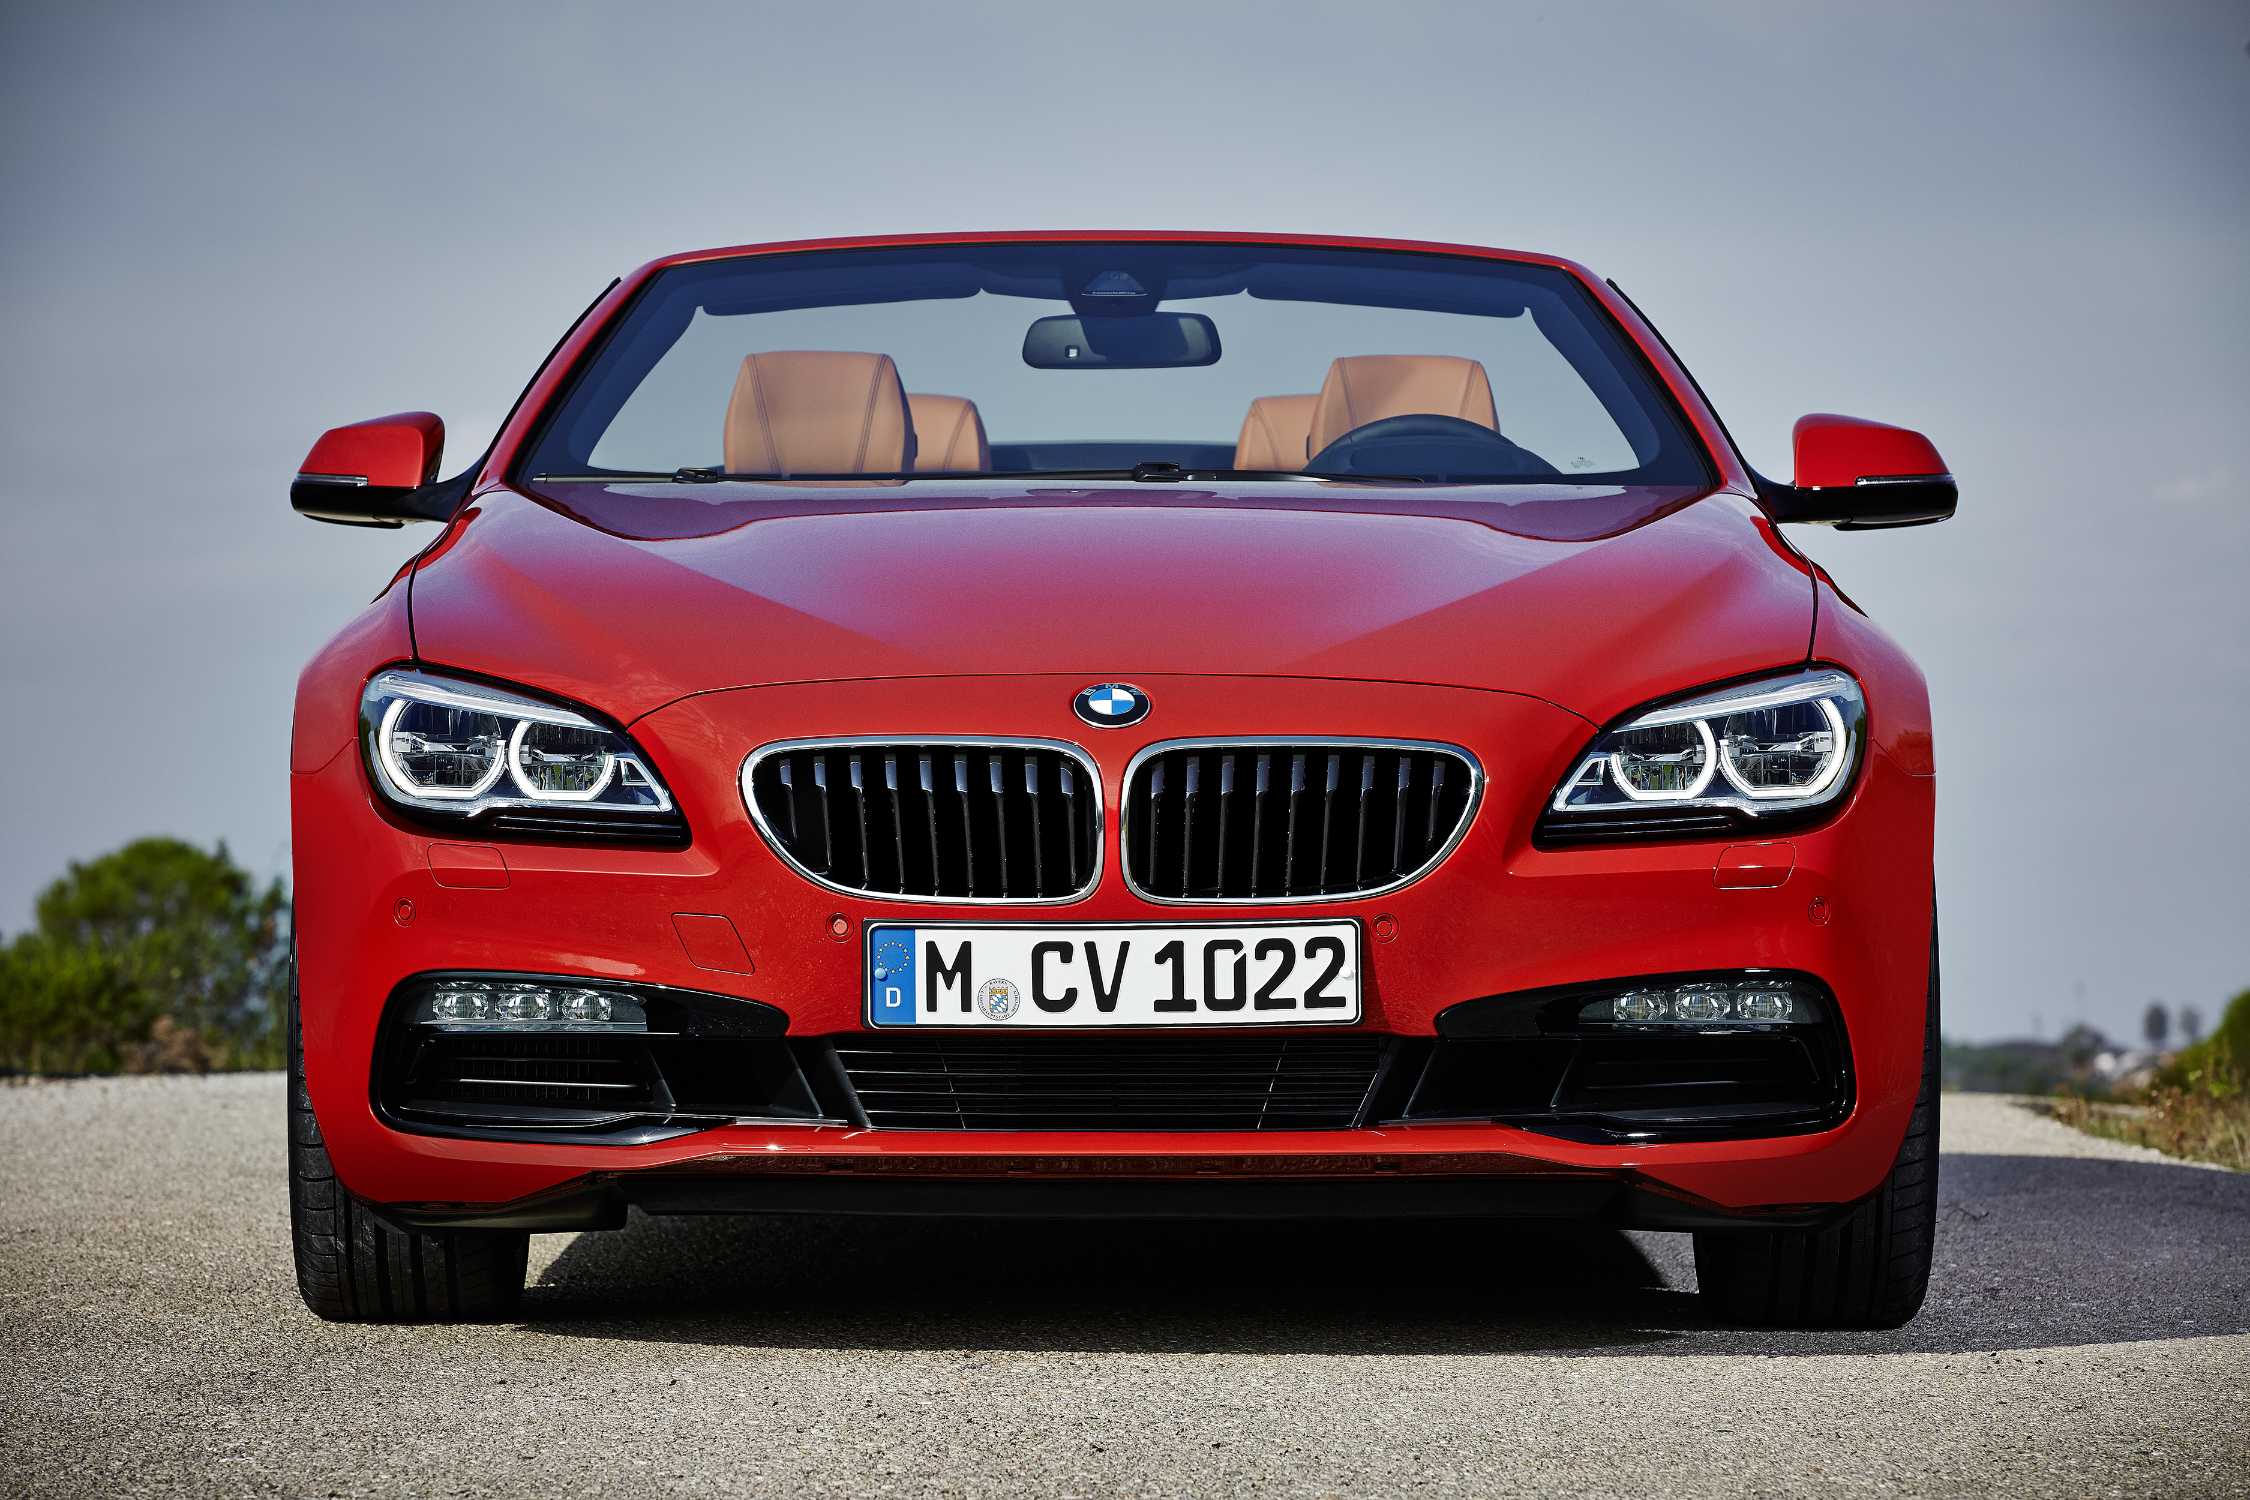 The new BMW 6 Series range for 2015